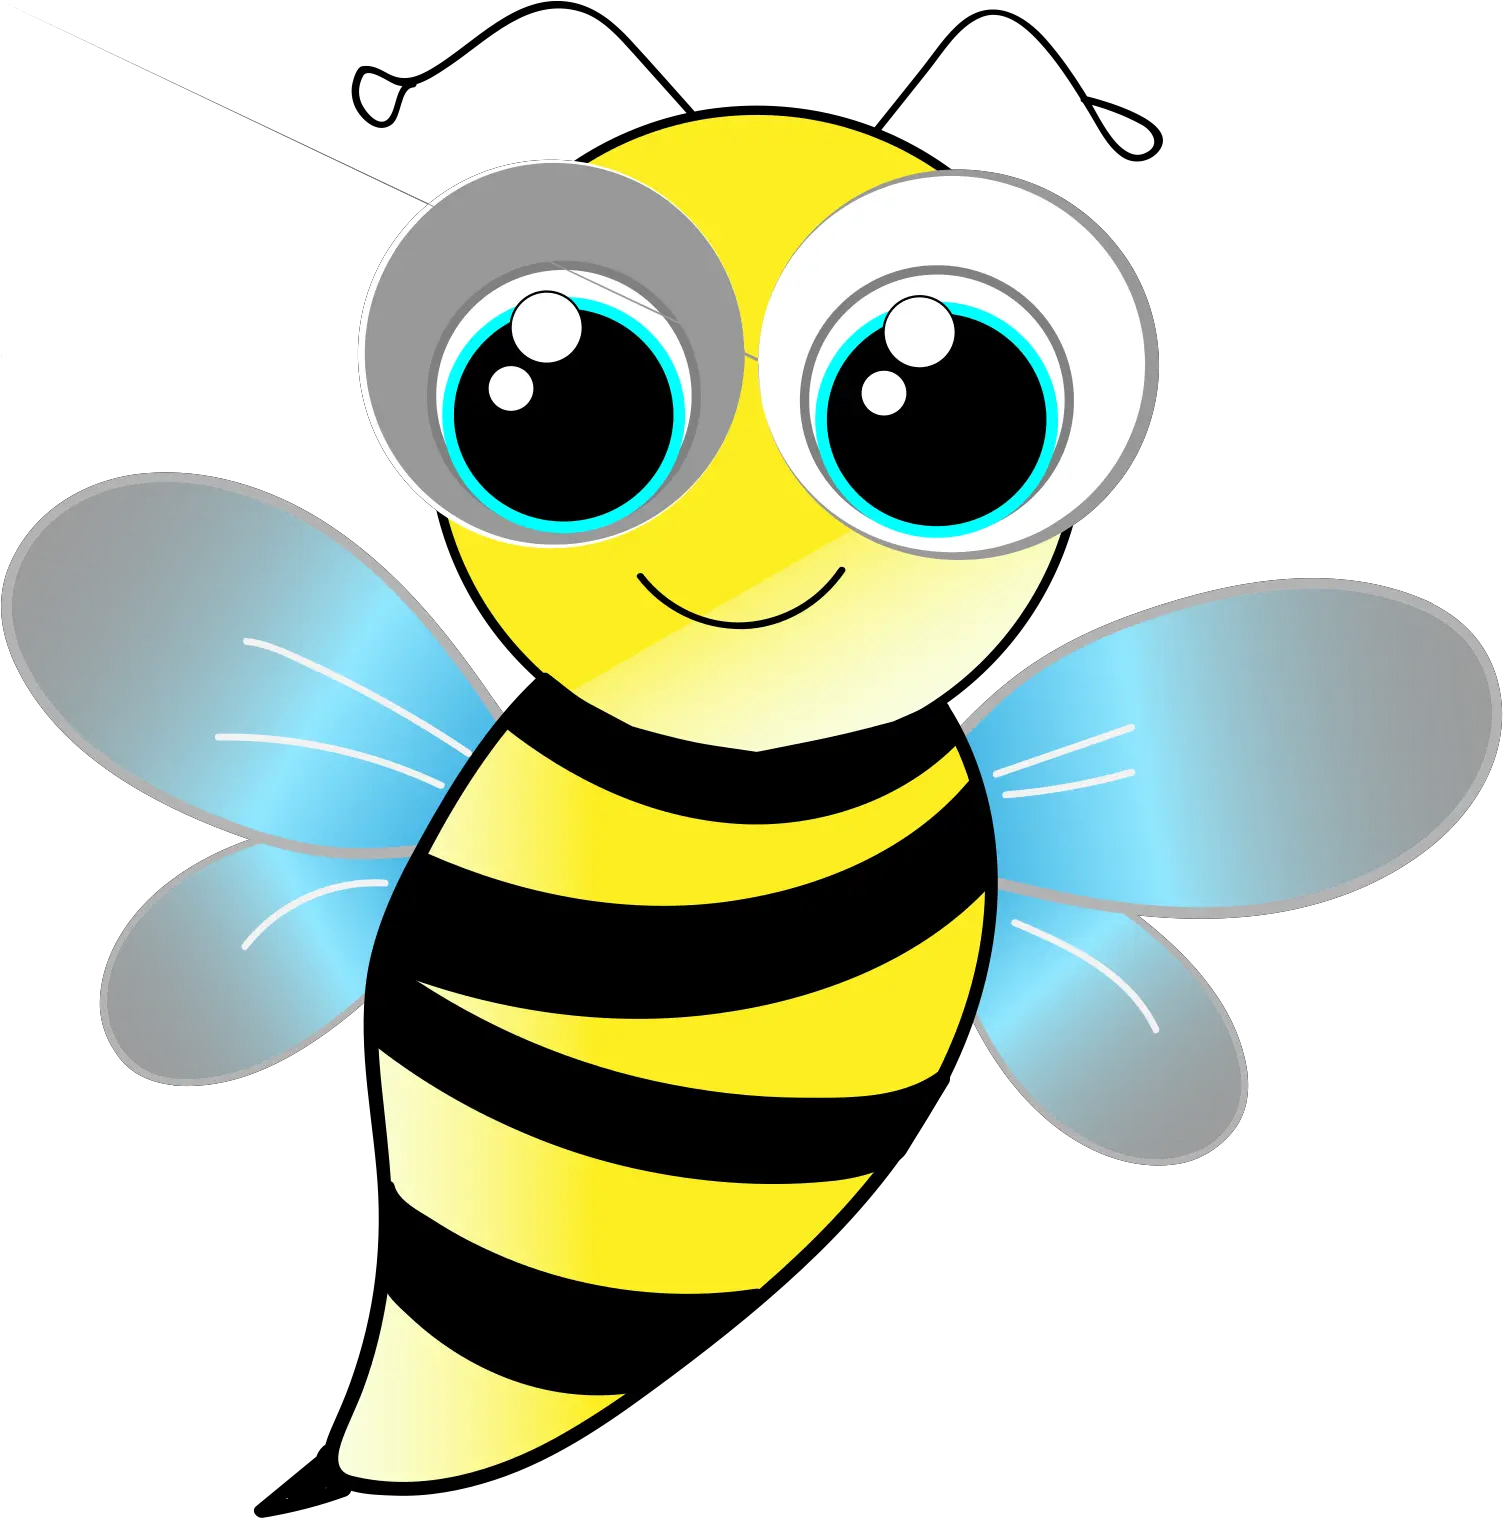 Bumble Bee No Smile 2 Png Svg Clip Art For Web Download Bees Important Clip Art Bumble Png